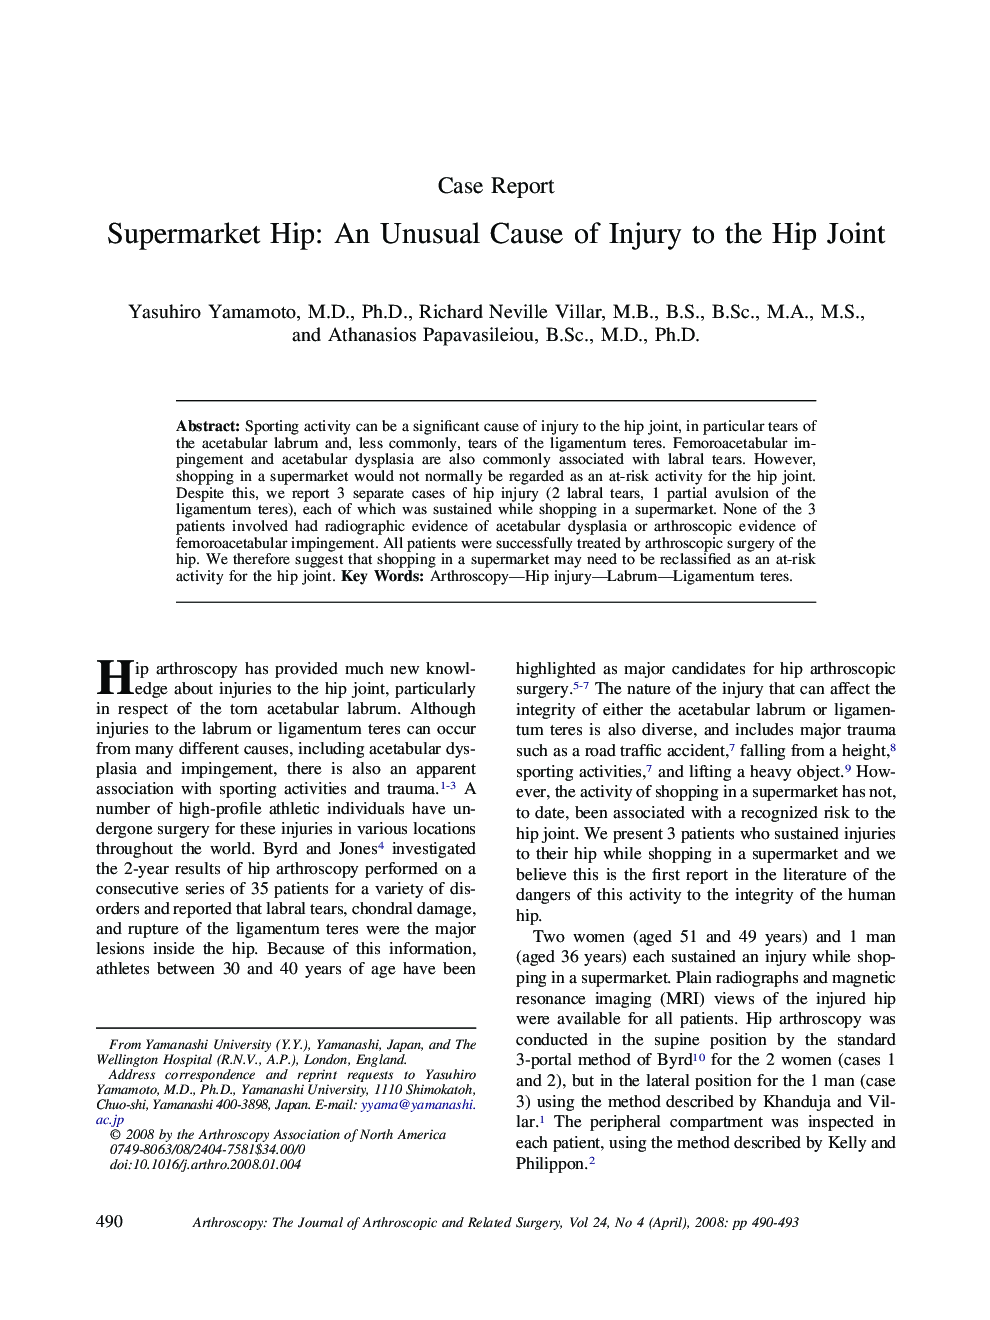 Supermarket Hip: An Unusual Cause of Injury to the Hip Joint